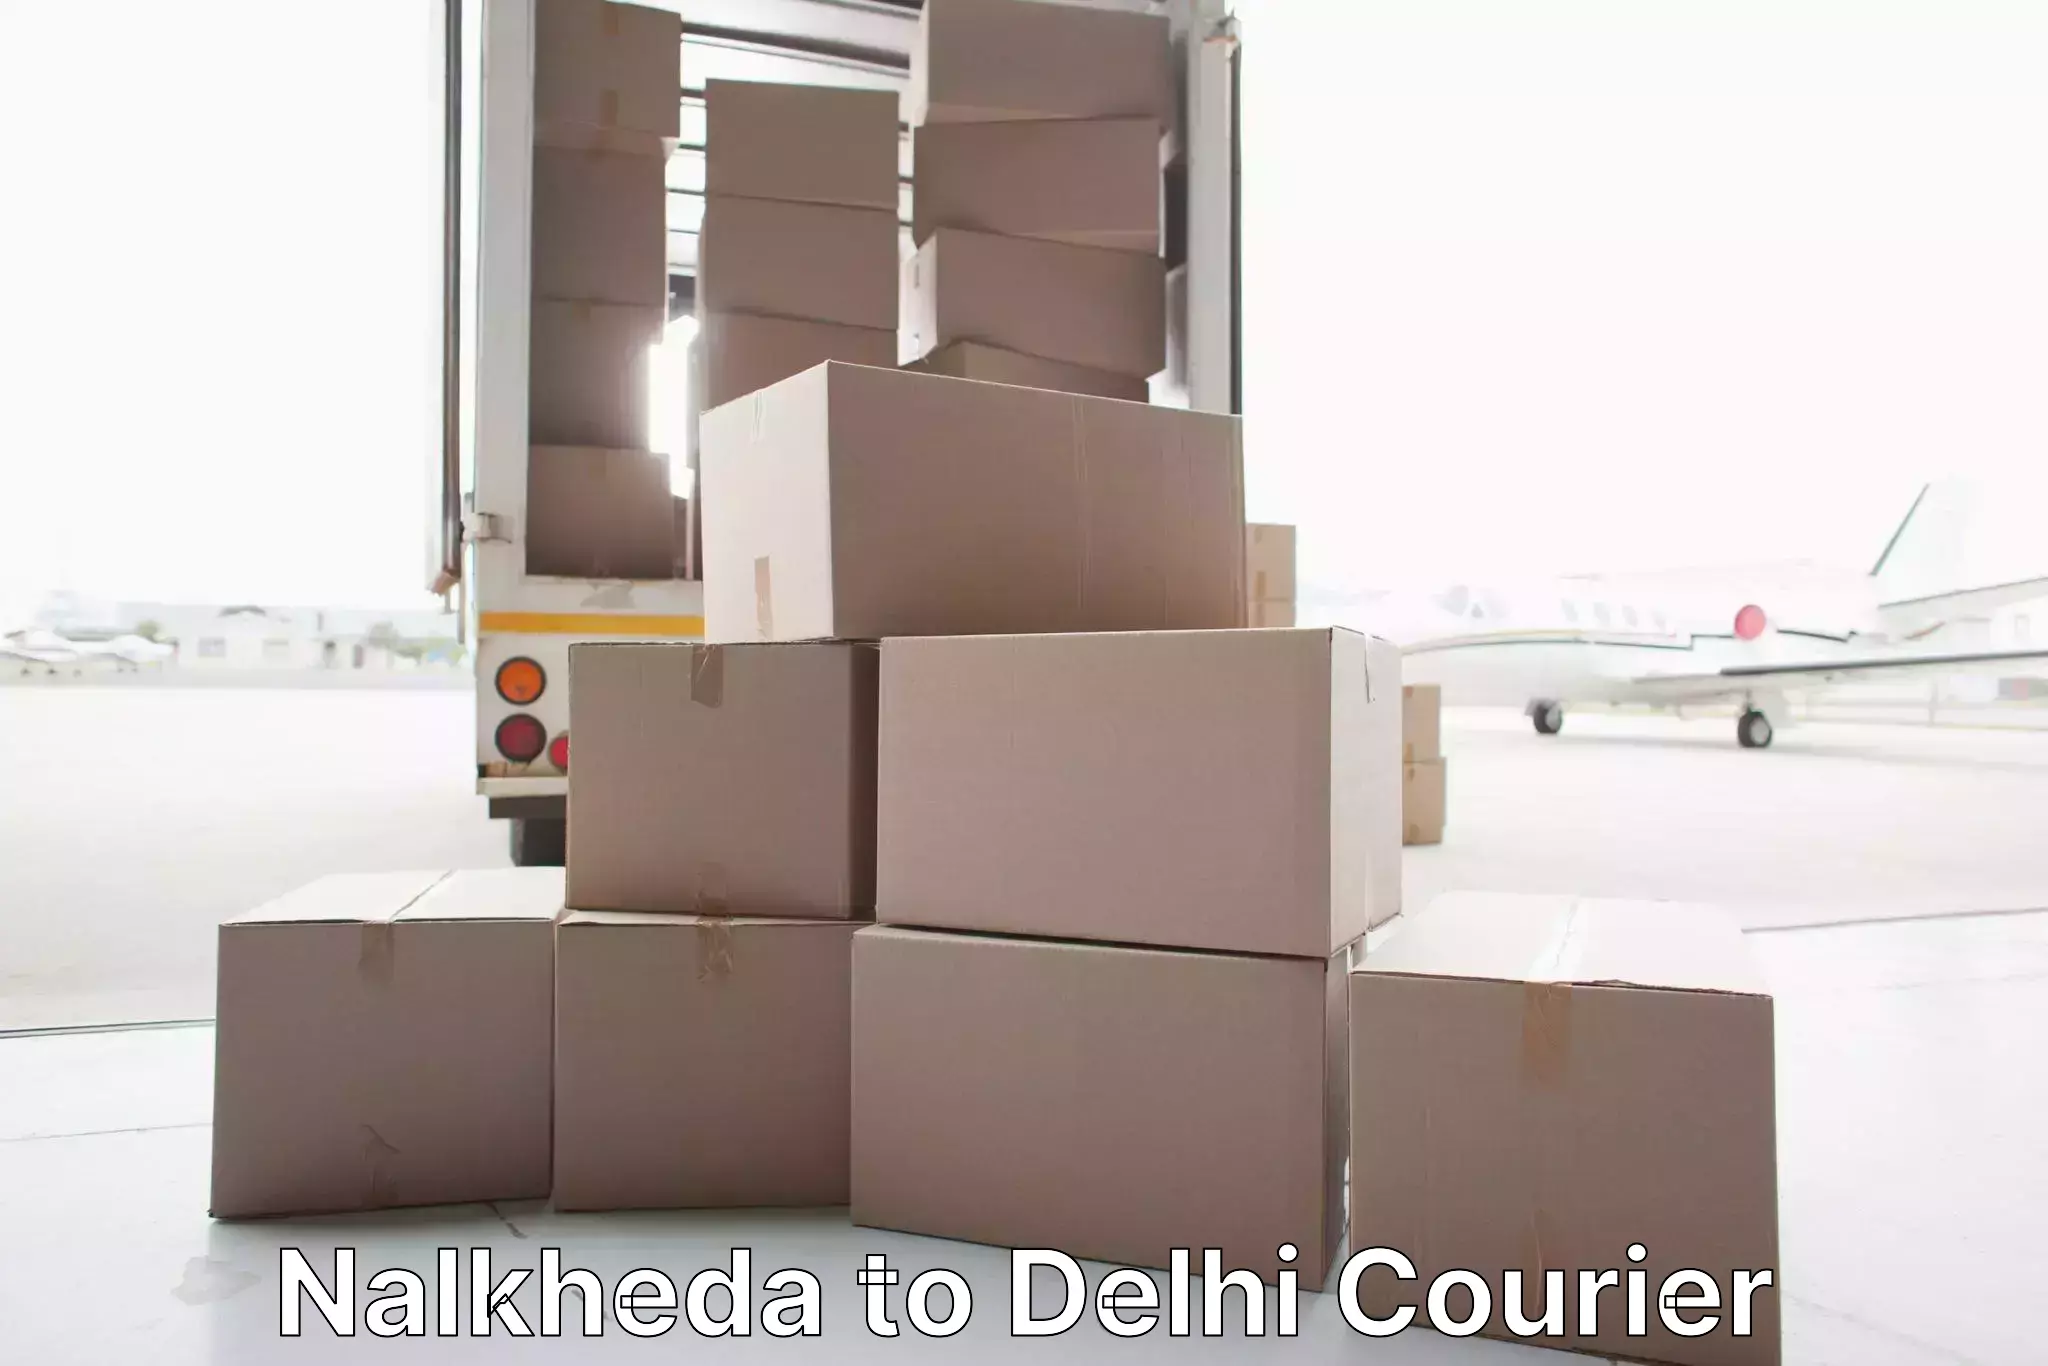 Professional packing services Nalkheda to Delhi